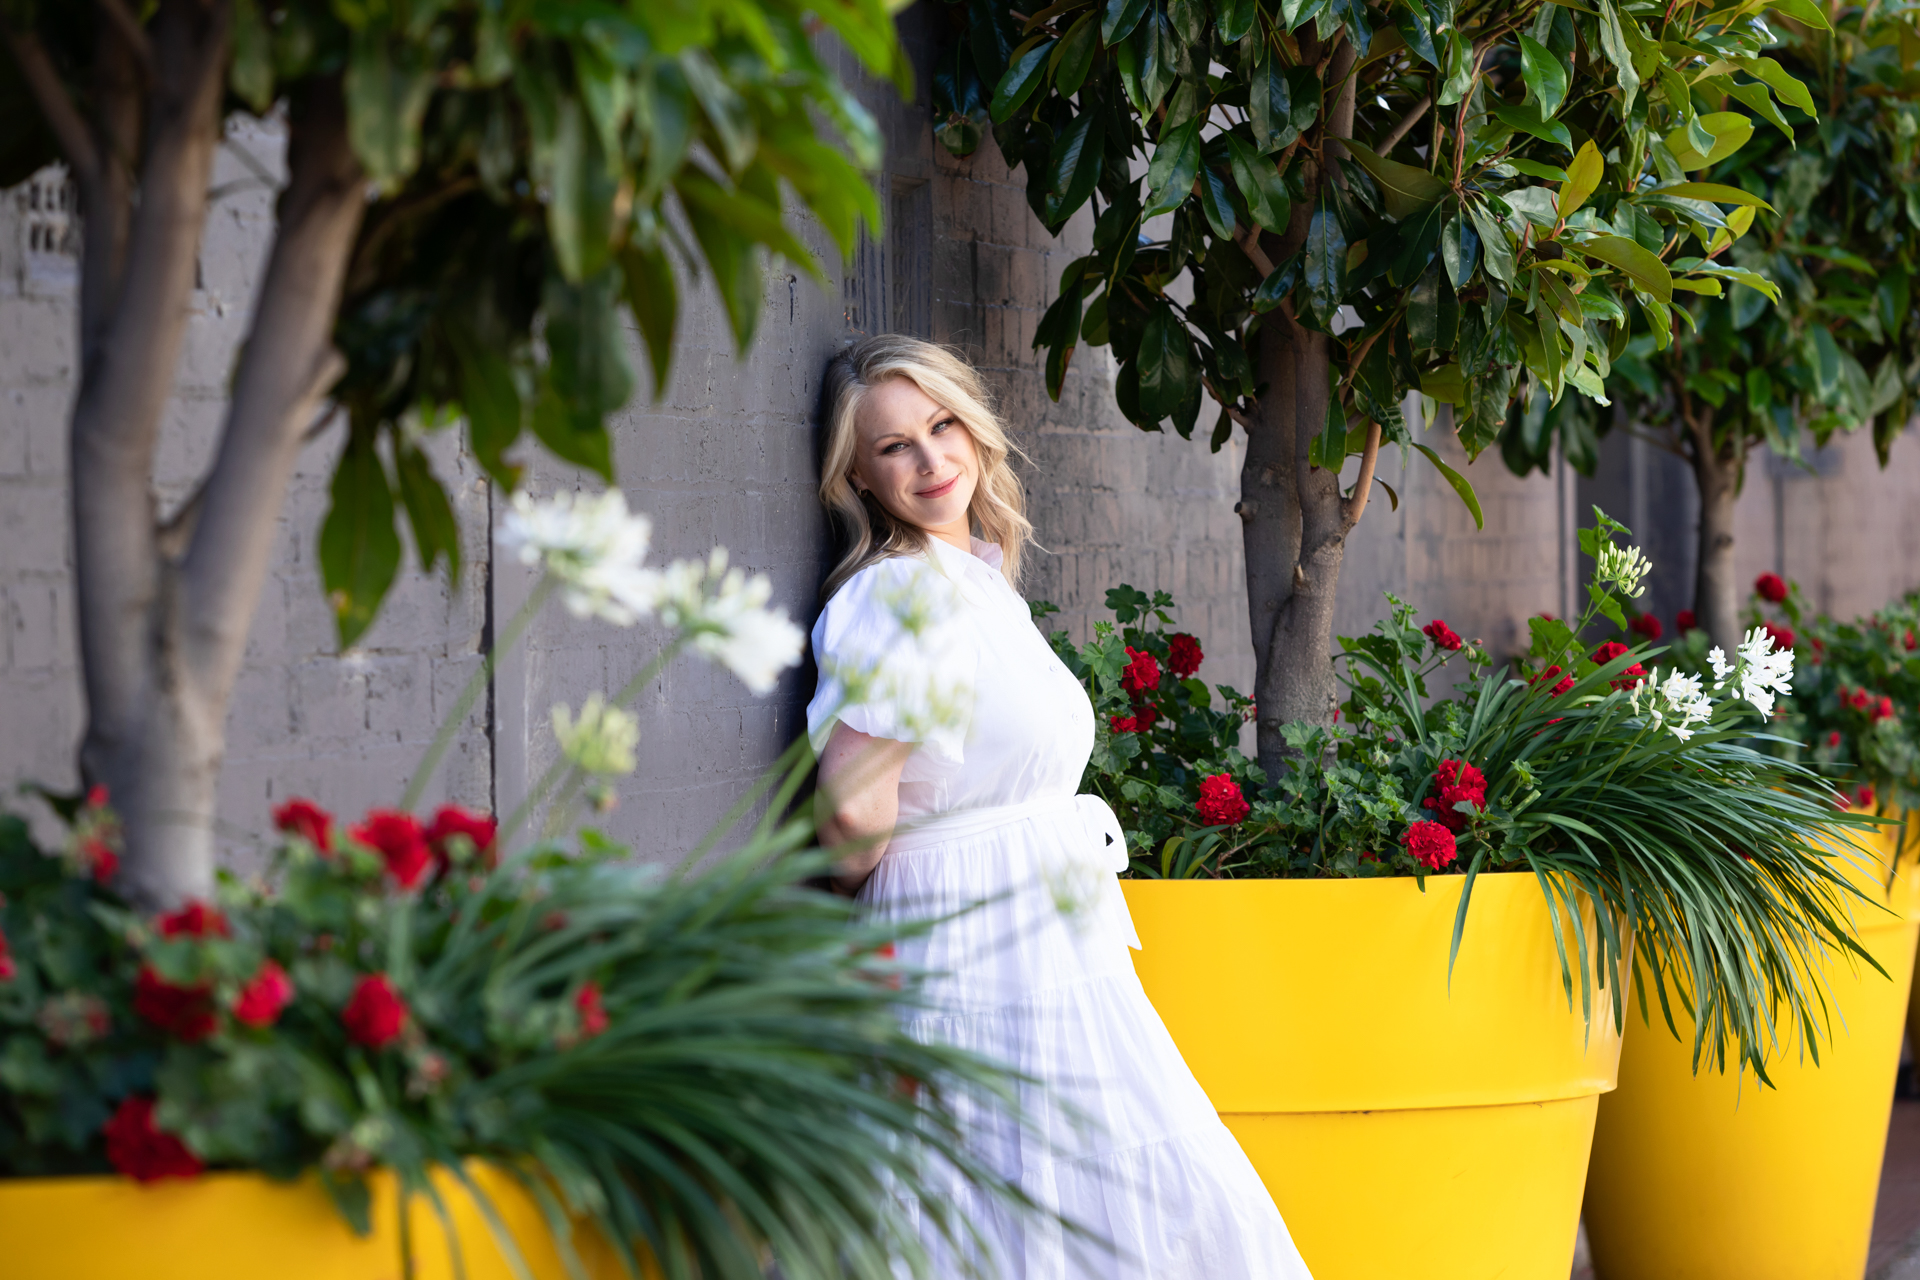 personal branding photo of a lady standing between planted yellow pots